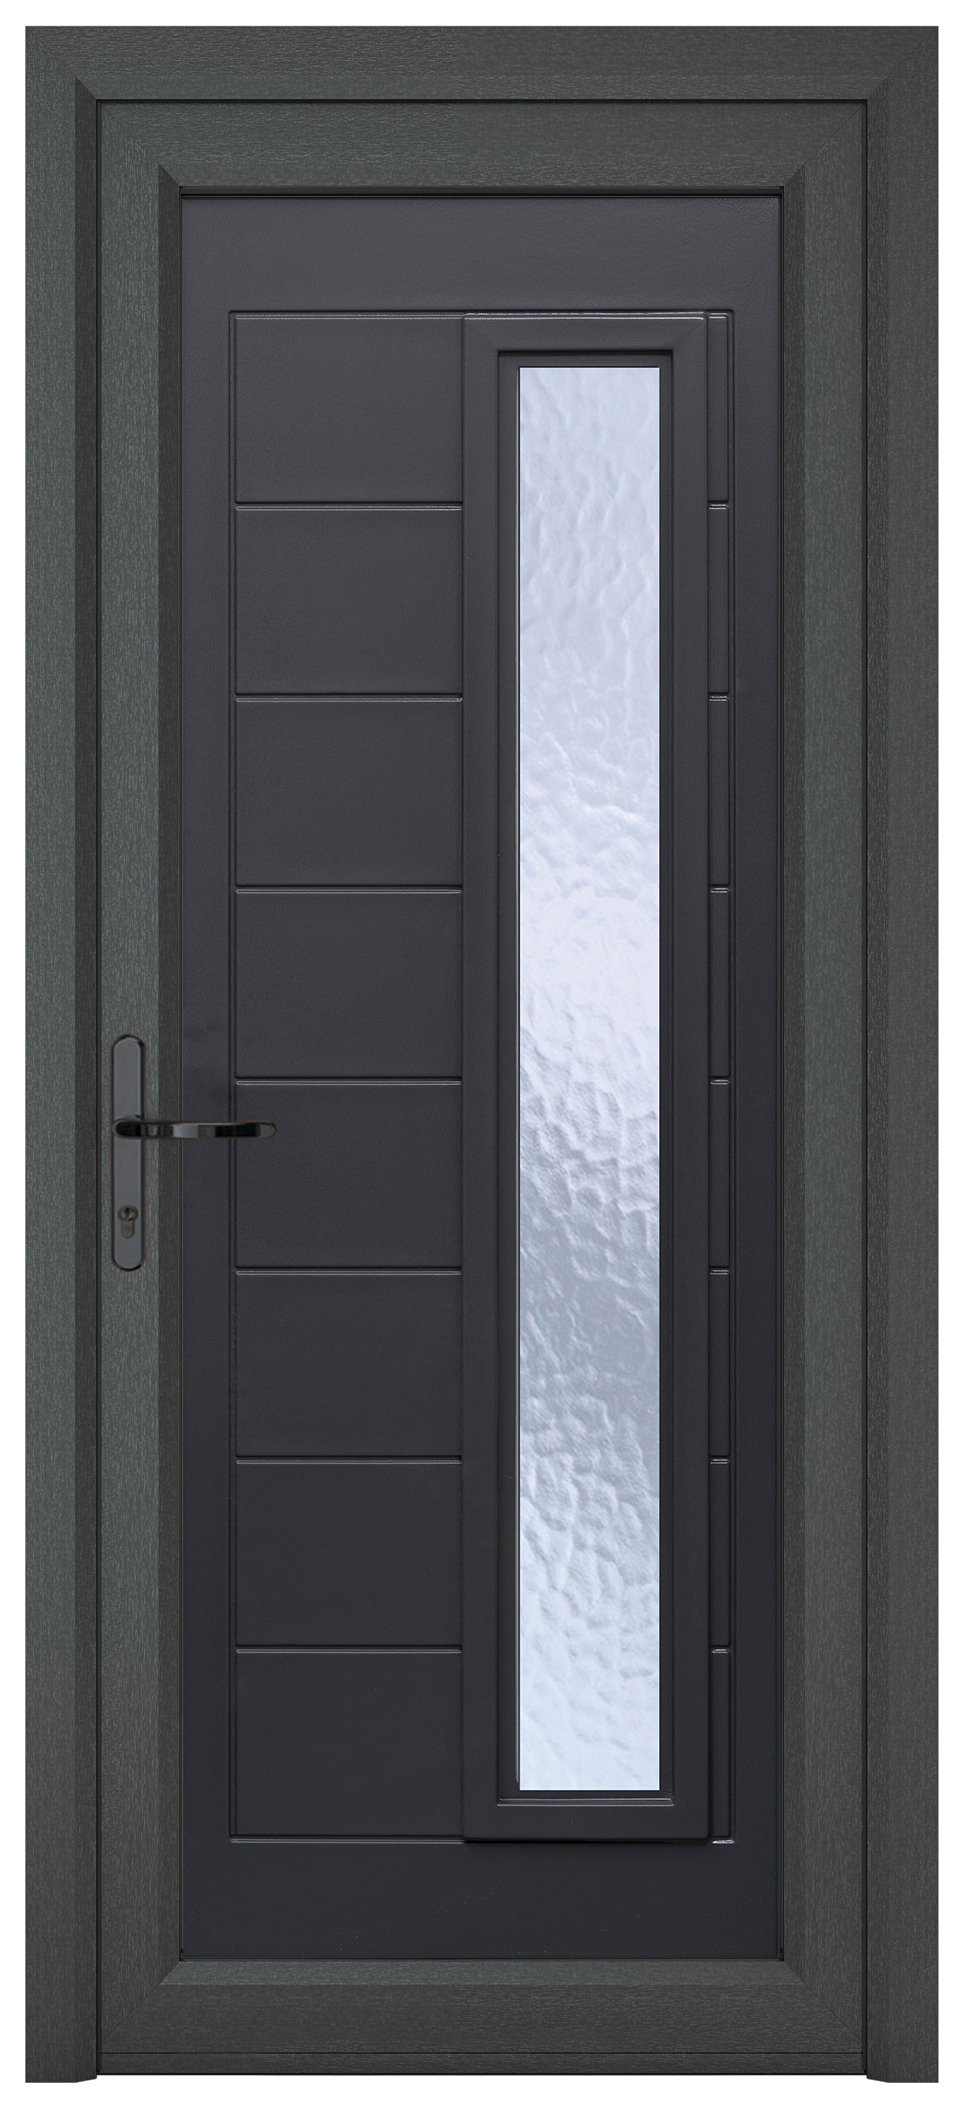 Crystal Monaco Right Hand Pre-hung Grey uPVC Front Door with Long Obscure Glazing - 920 x 2090mm